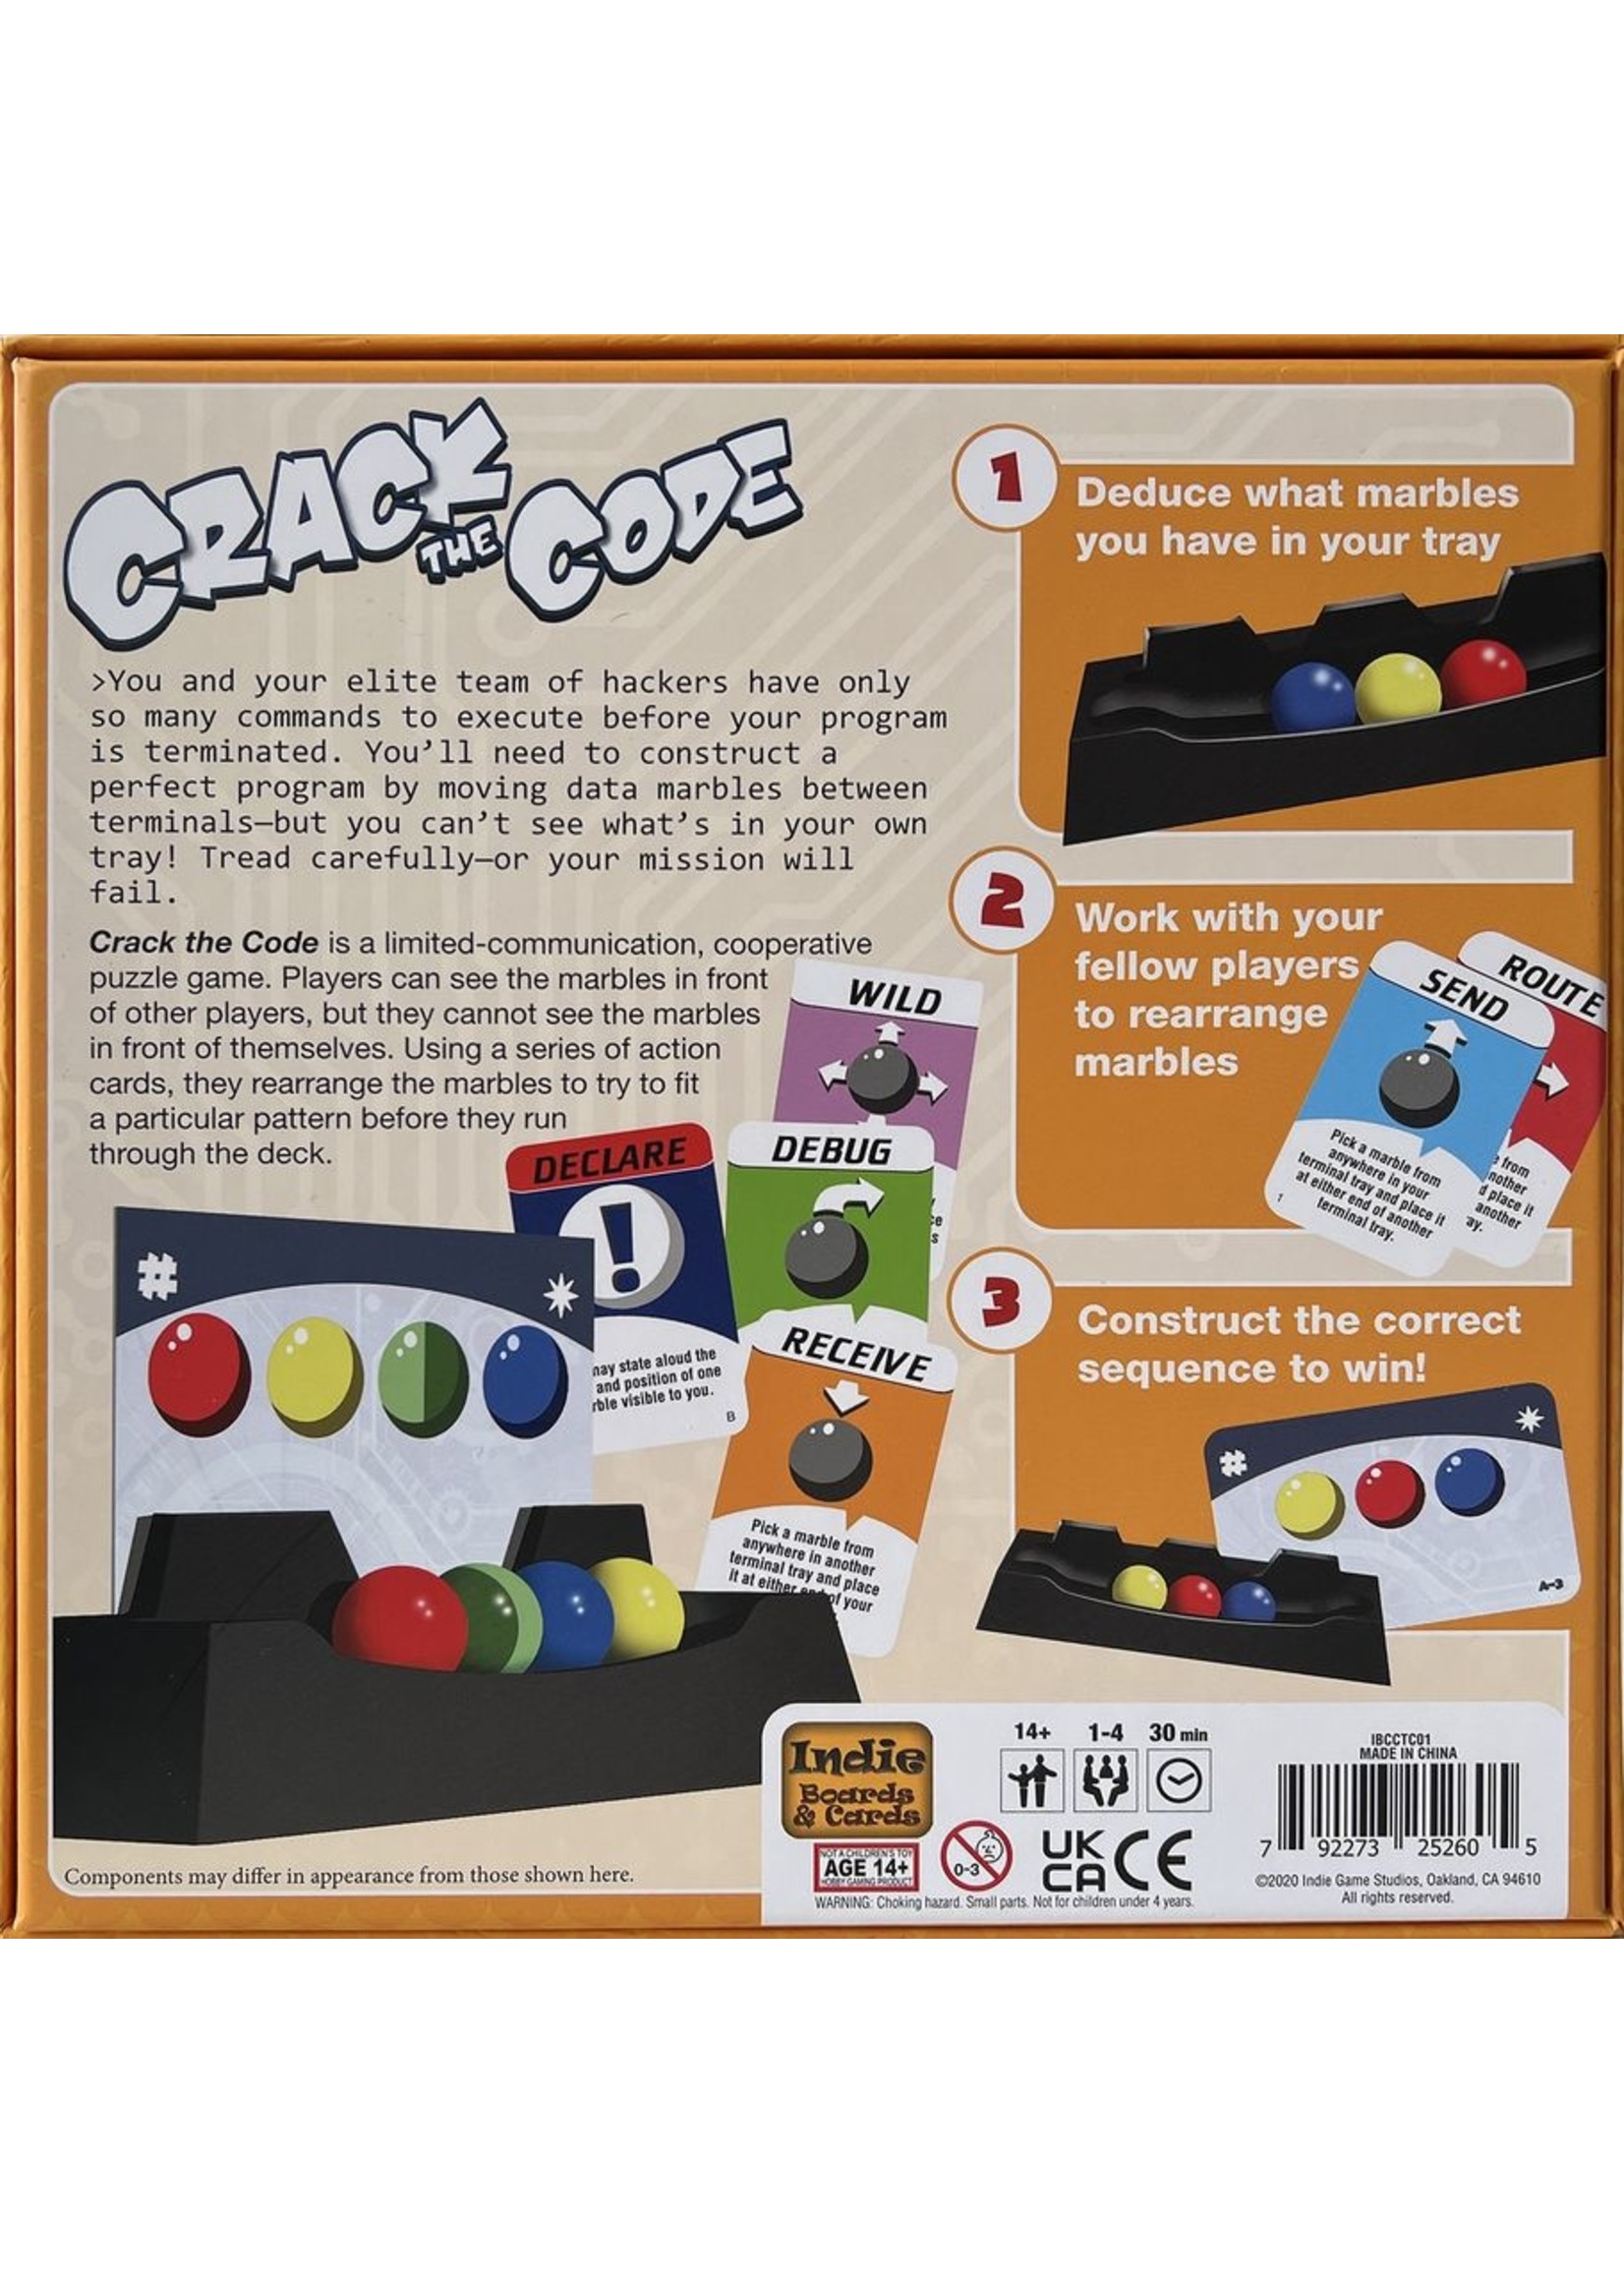 Indie Boards & Cards Crack the Code